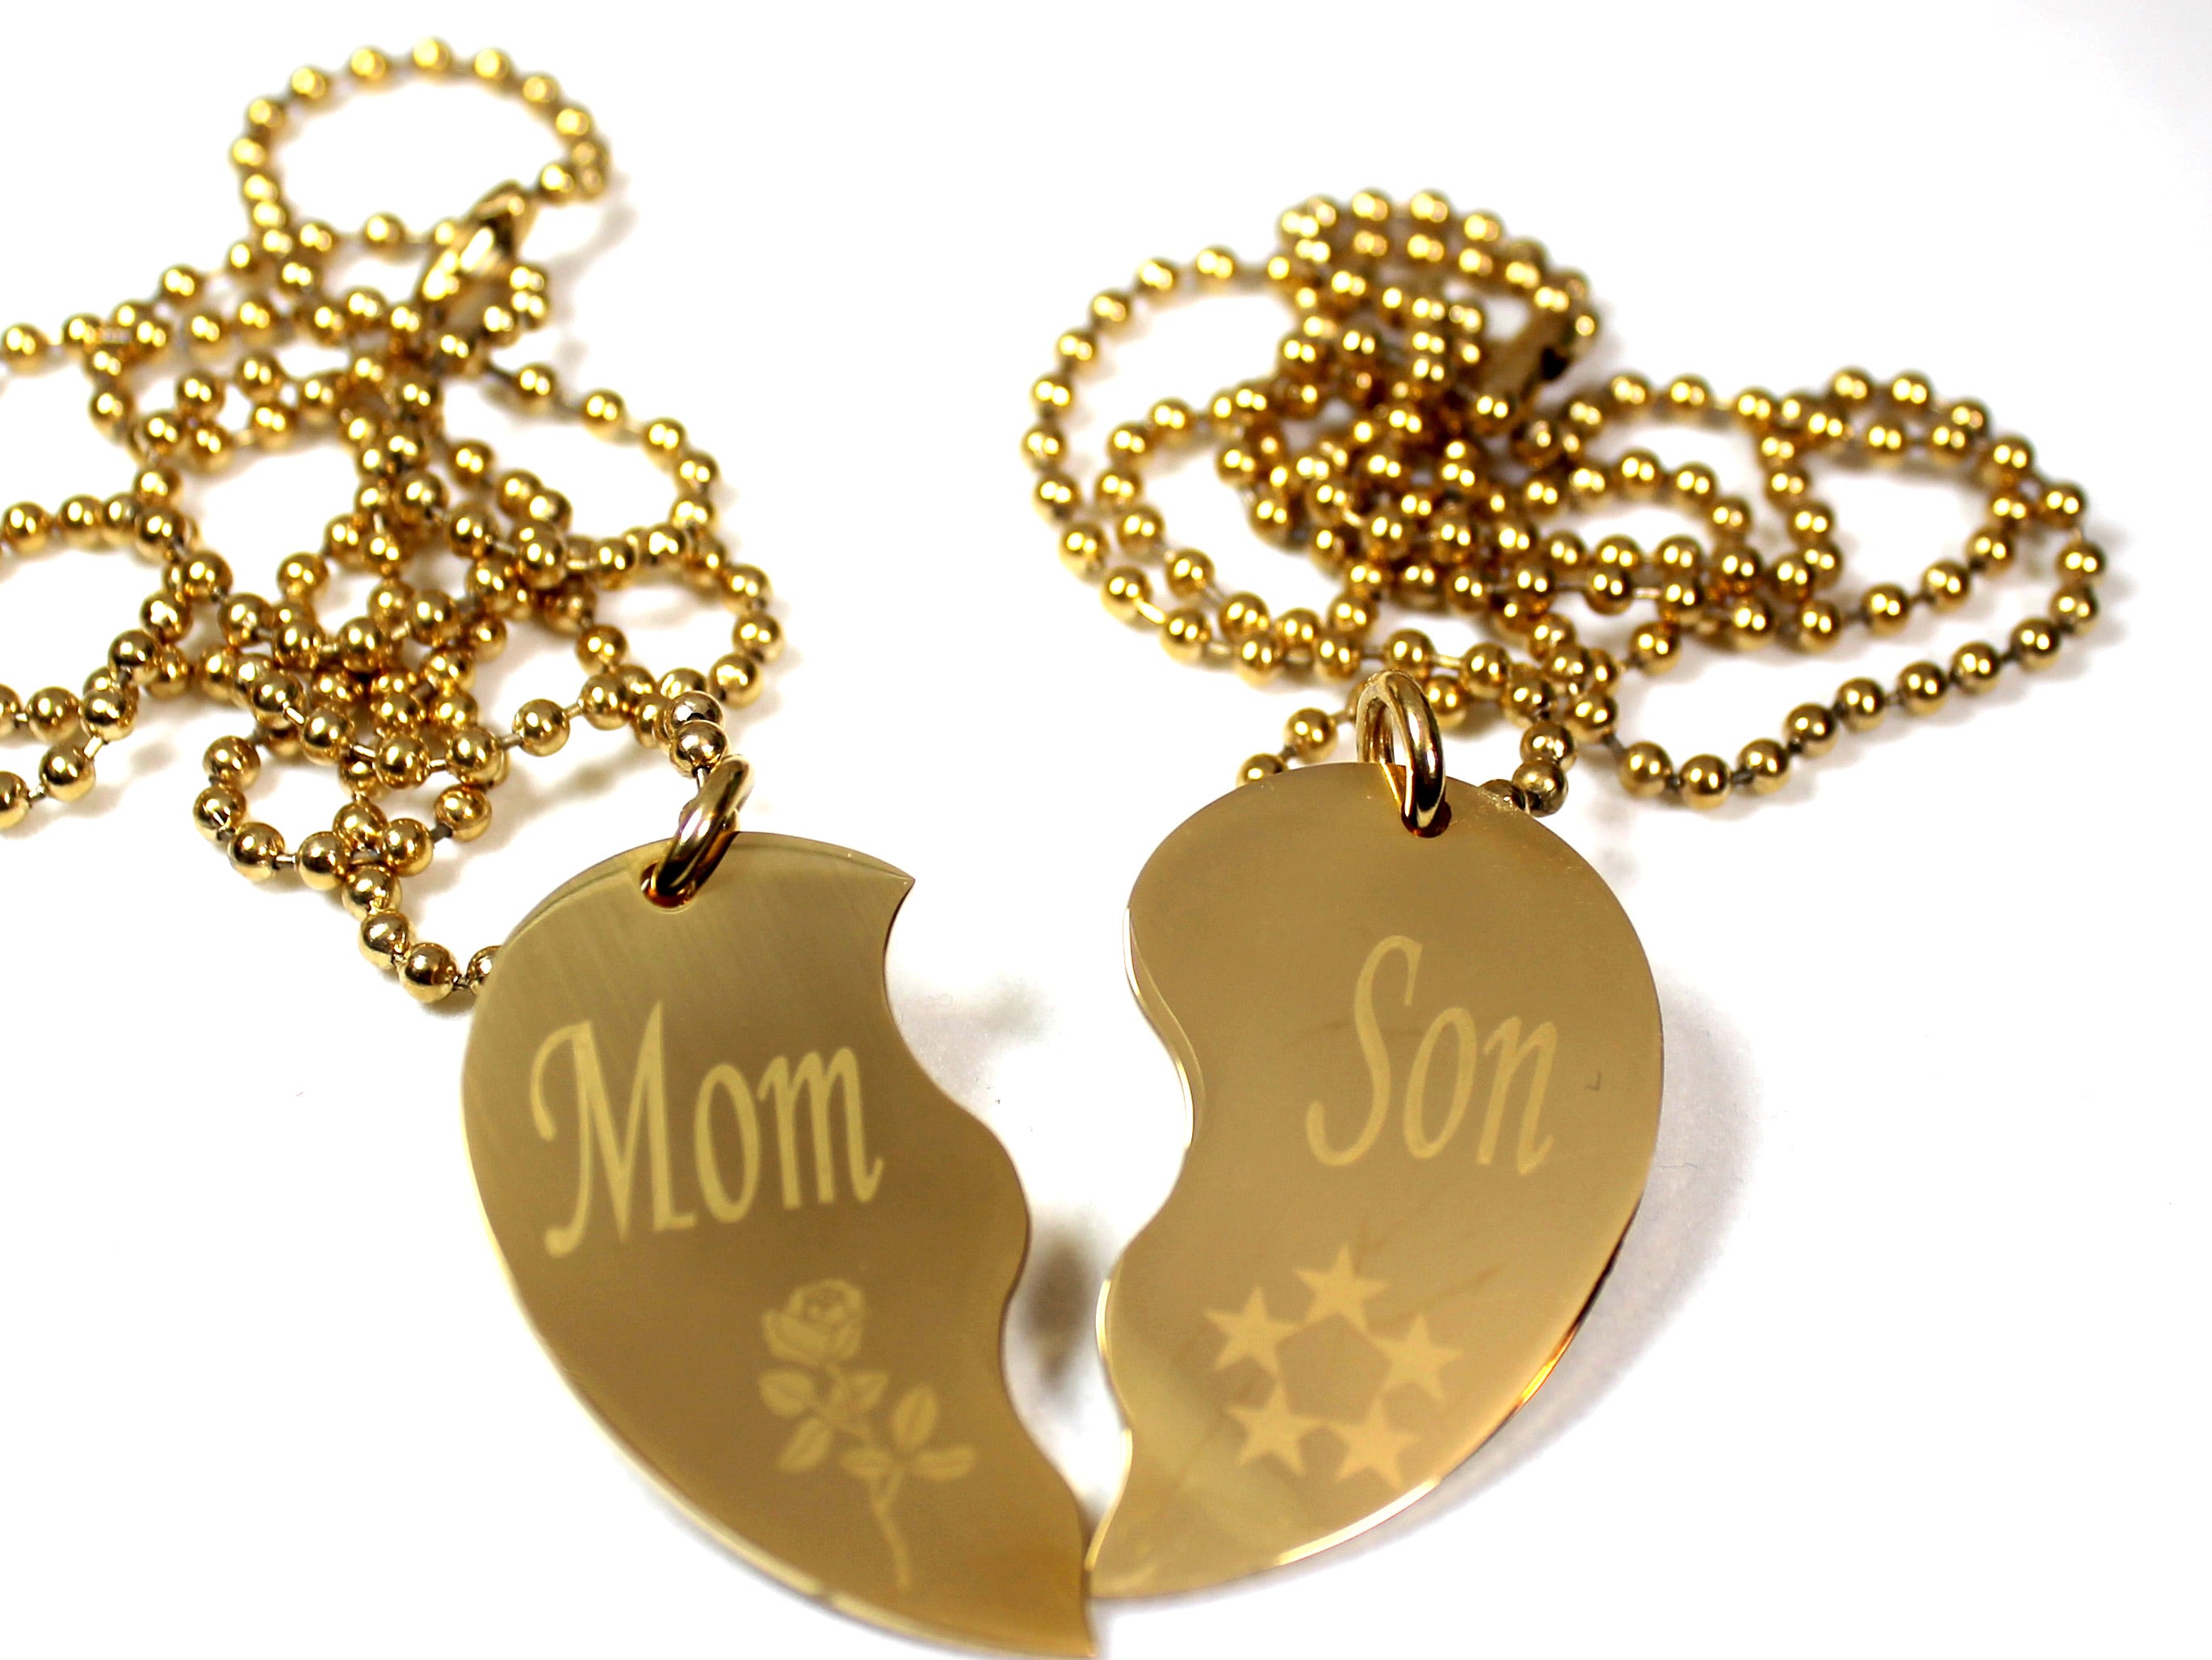 SPLIT HEART NECKLACE  MOM SON SET STAINLESS STEEL IPG GOLD PLATED PENDANTS TAGS - Samstagsandmore